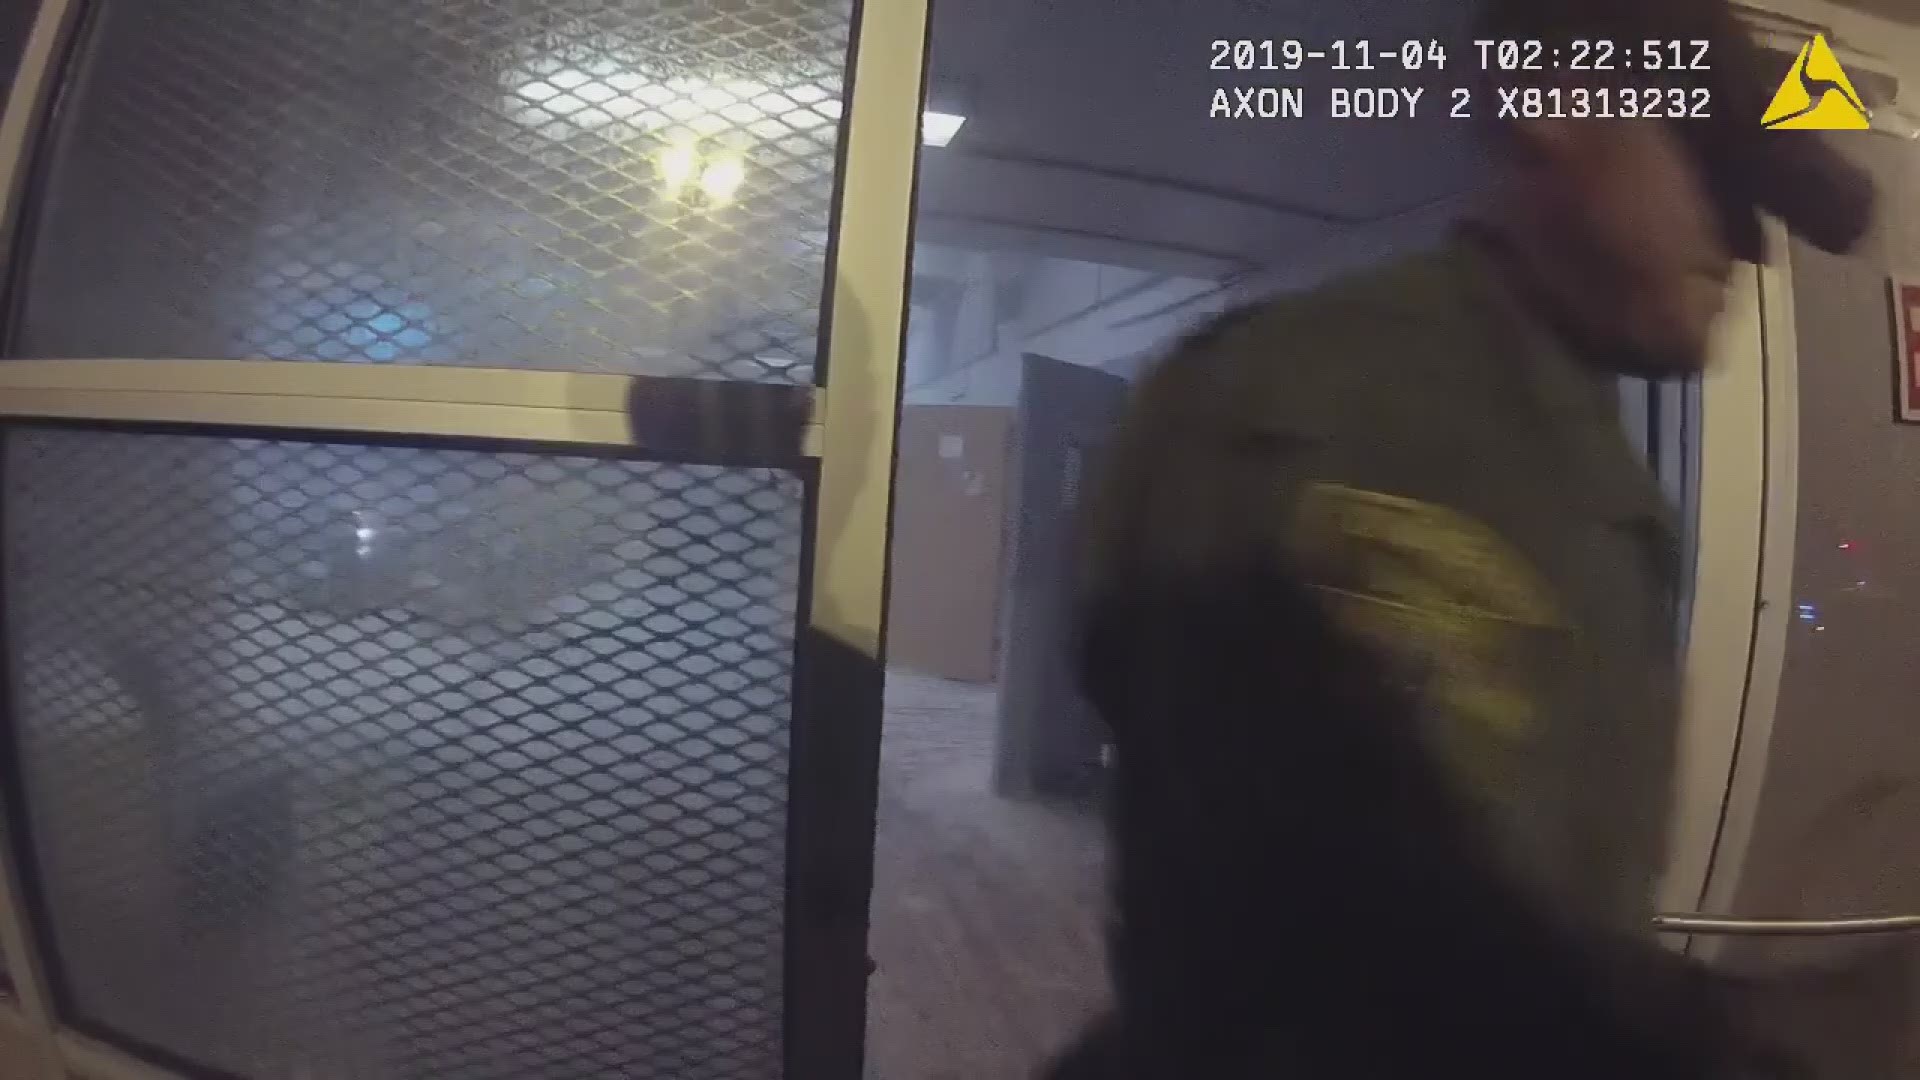 Body camera video shows what officers encountered on the Nov. 3 incident at Mountain View.